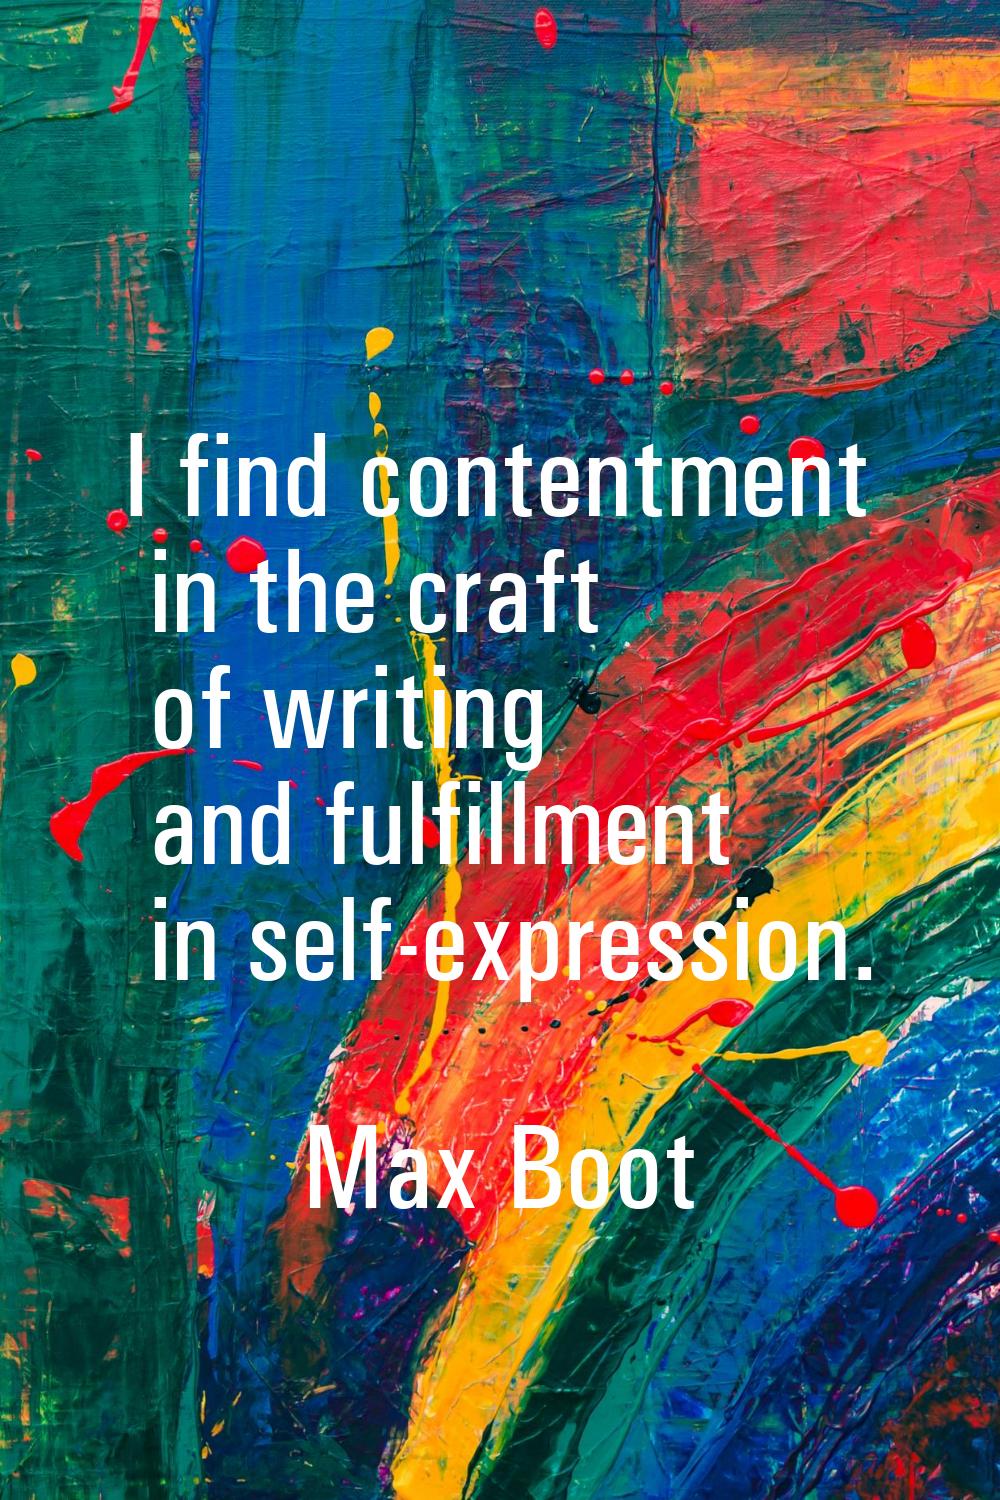 I find contentment in the craft of writing and fulfillment in self-expression.